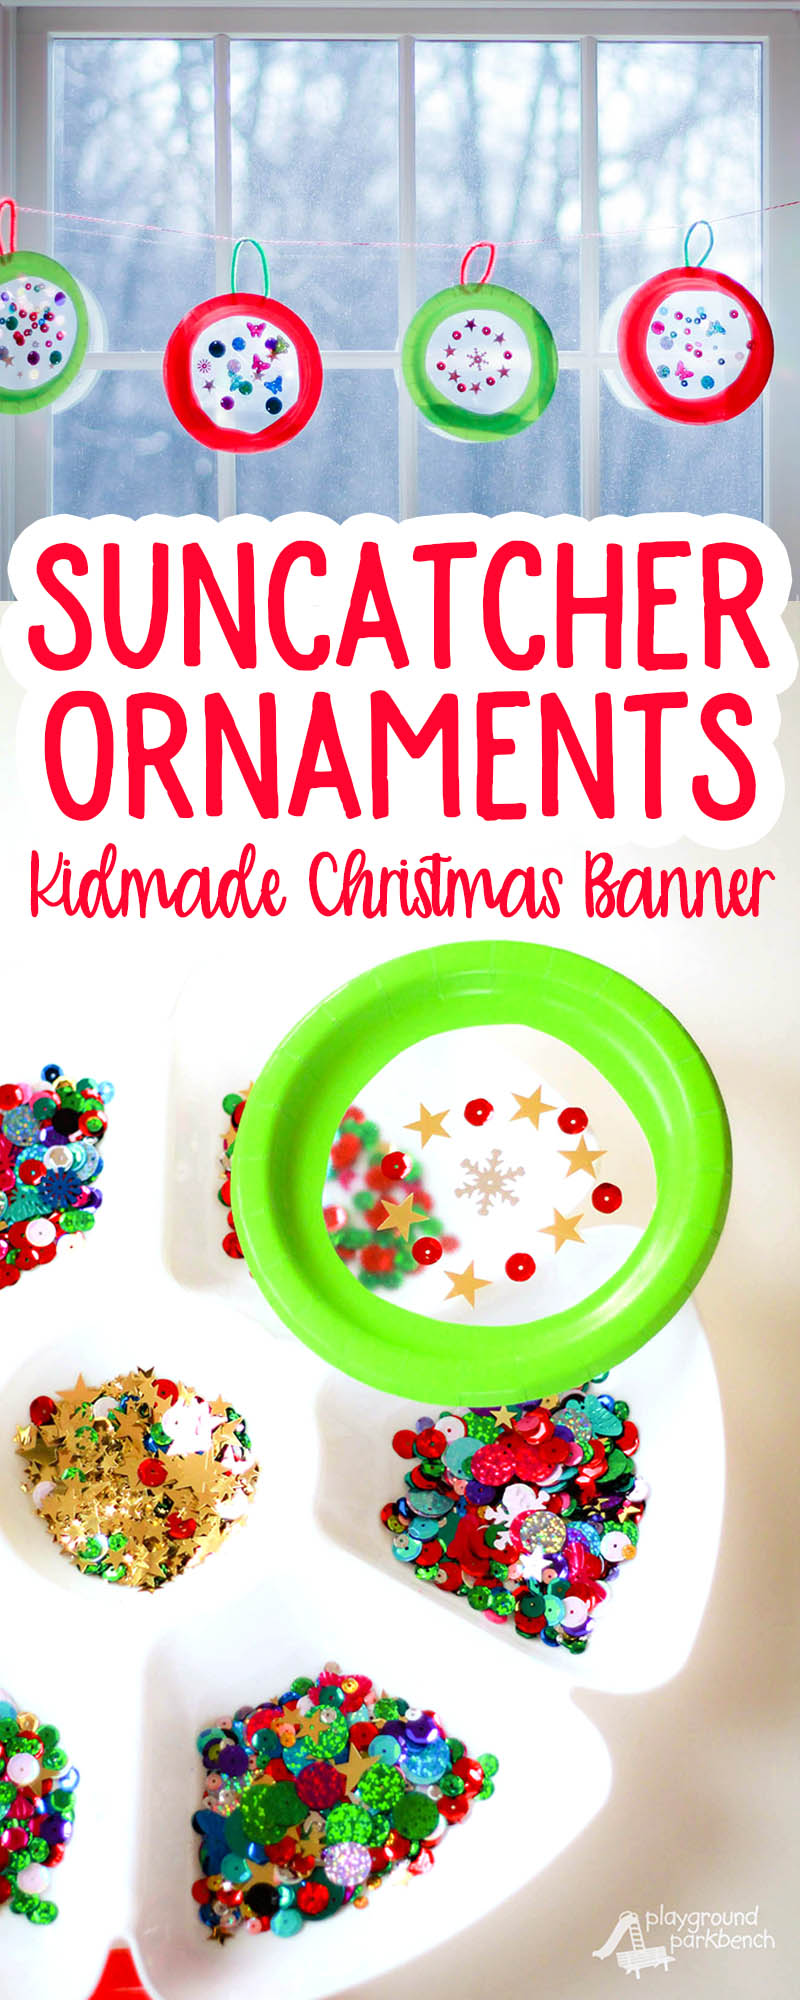 Let your kids help create their own Christmas decor with this simple Suncatcher Christmas Ornament Christmas Banner. A great craft for kids of all ages, from toddlers to teens. Make as many as you want and string them up in front of your windows to capture the fleeting winter light! | Kids Crafts | Christmas Craft | Holiday Decor | DIY |